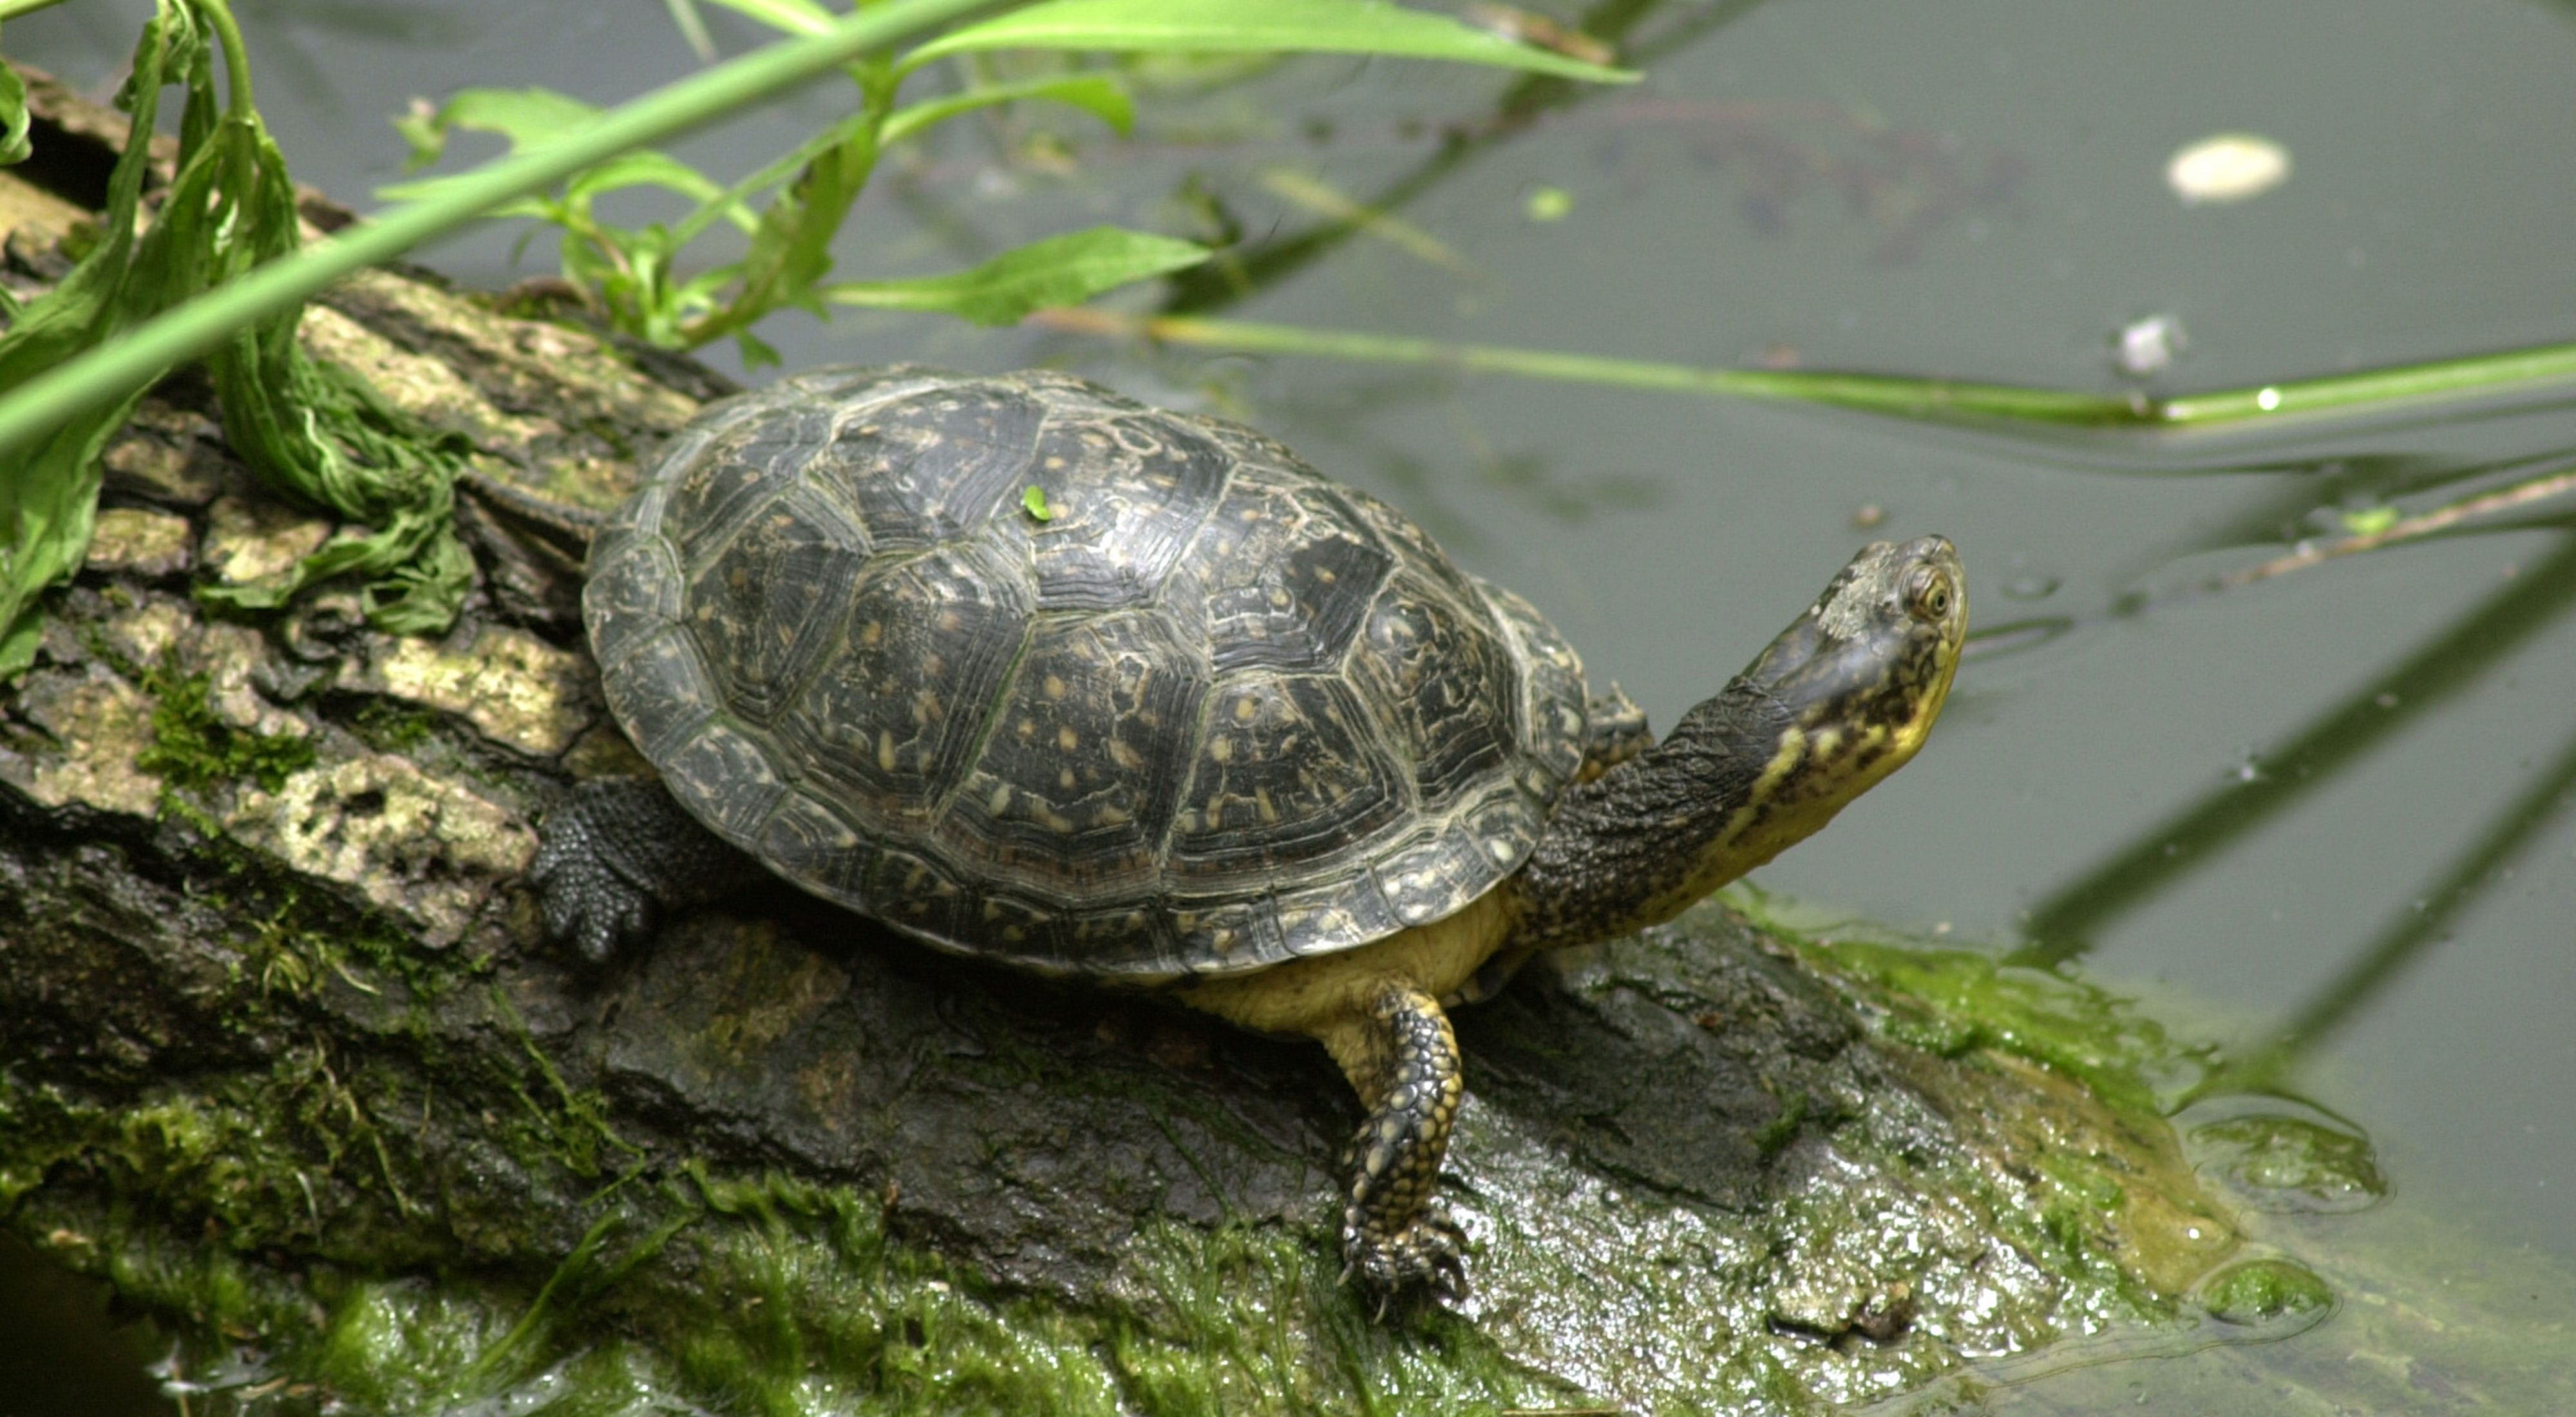 A turtle sits on a log in the water.